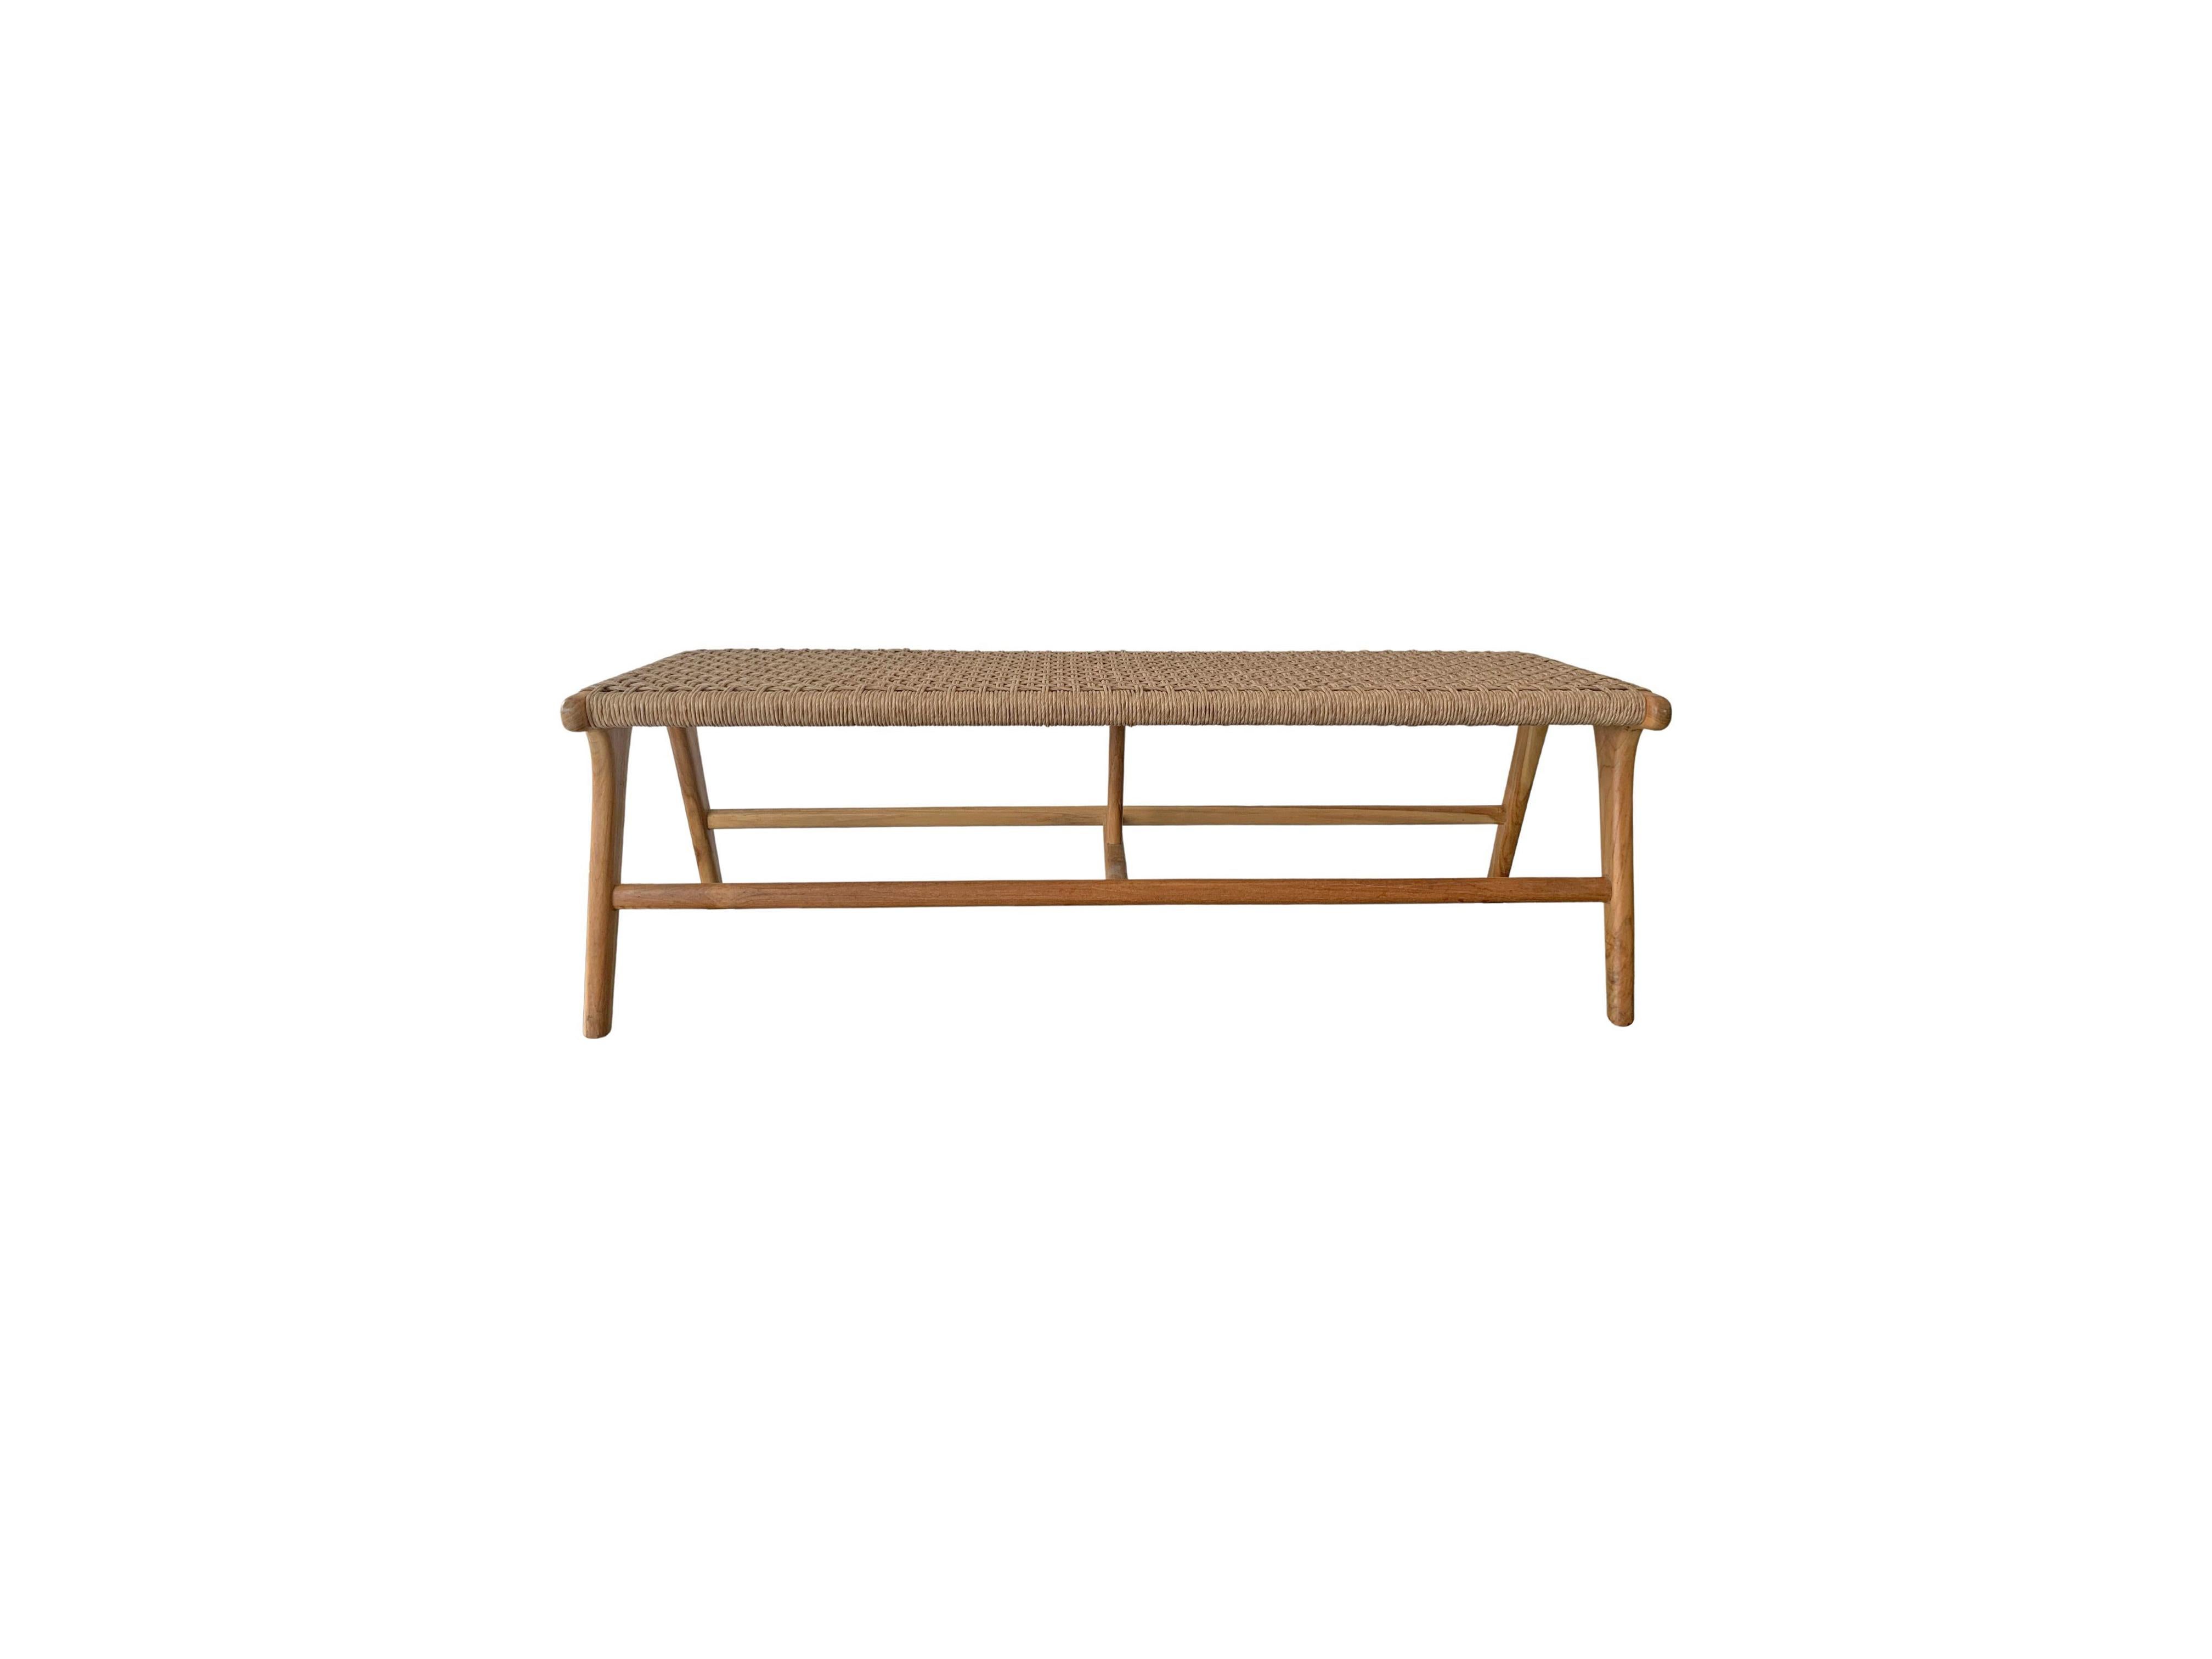 A hand-crafted teak framed & woven synthetic rattan bench. These benches are crafted by local artisans using a wood joinery technique without the use of nails. They feature a subtle wood texture and are robust and sturdy. Synthetic rattan is more